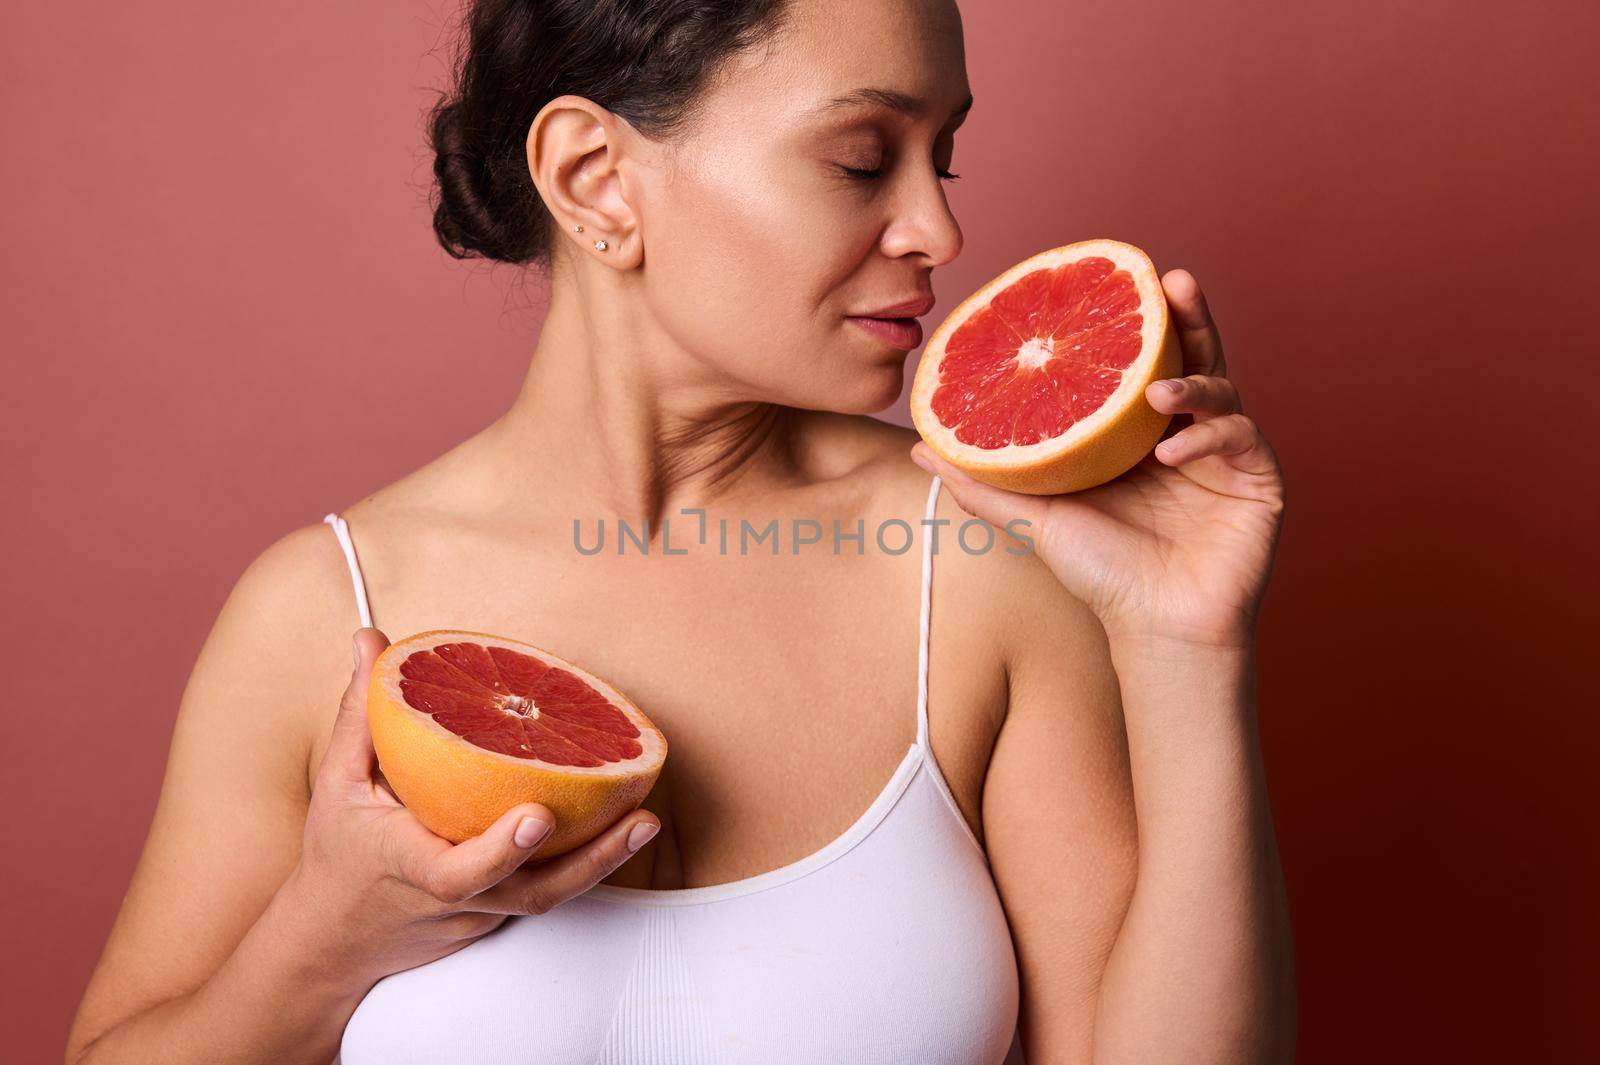 Middle aged woman holding grapefruit halves in her hands, enjoying their aroma, isolated on coral background with advertising space. Natural organic raw ingredients and healthcare and medicine concept by artgf